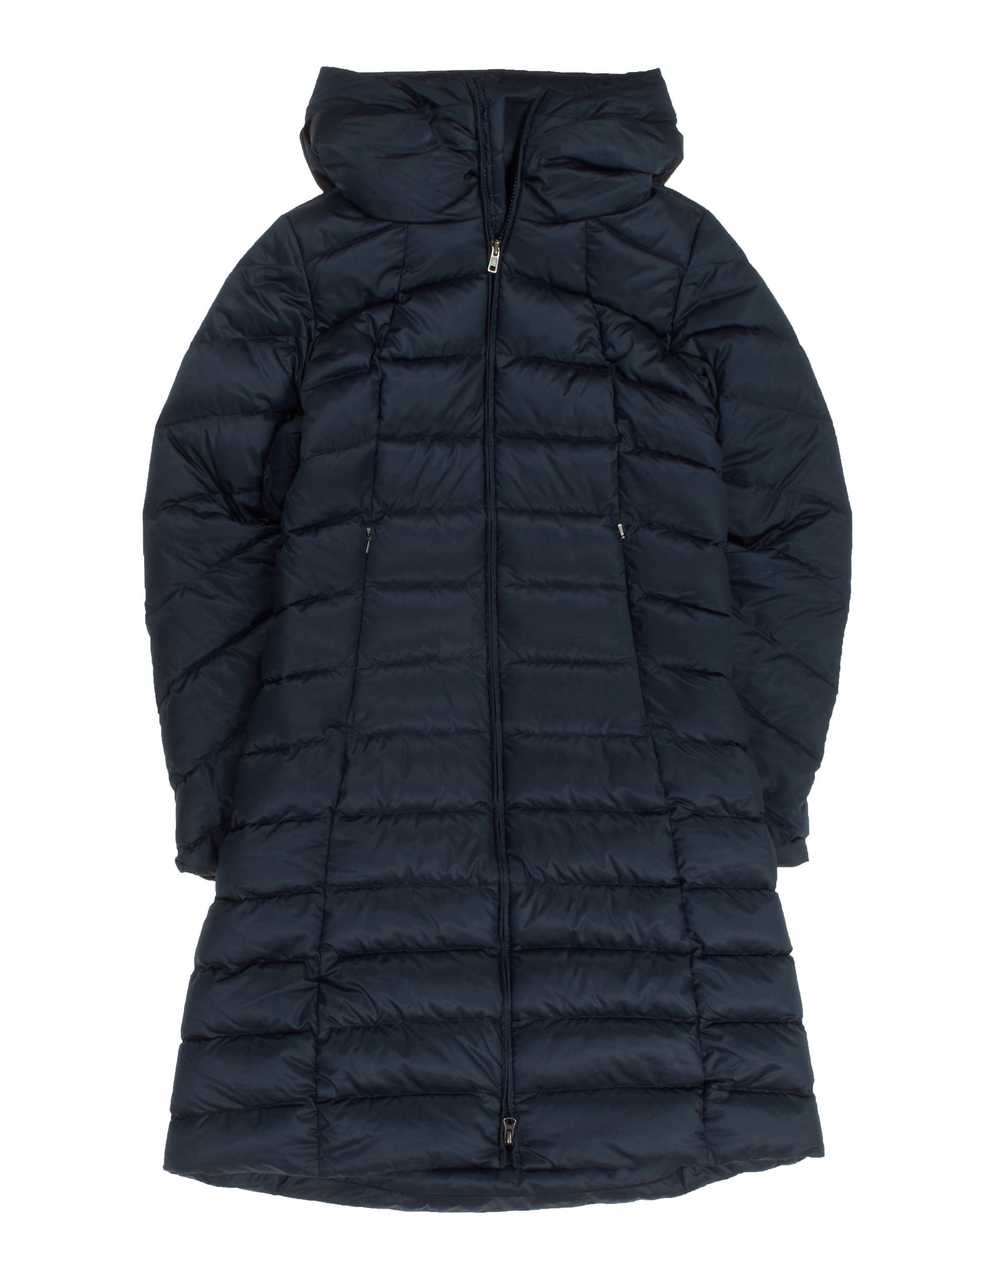 Patagonia - W's Downtown Parka - image 1